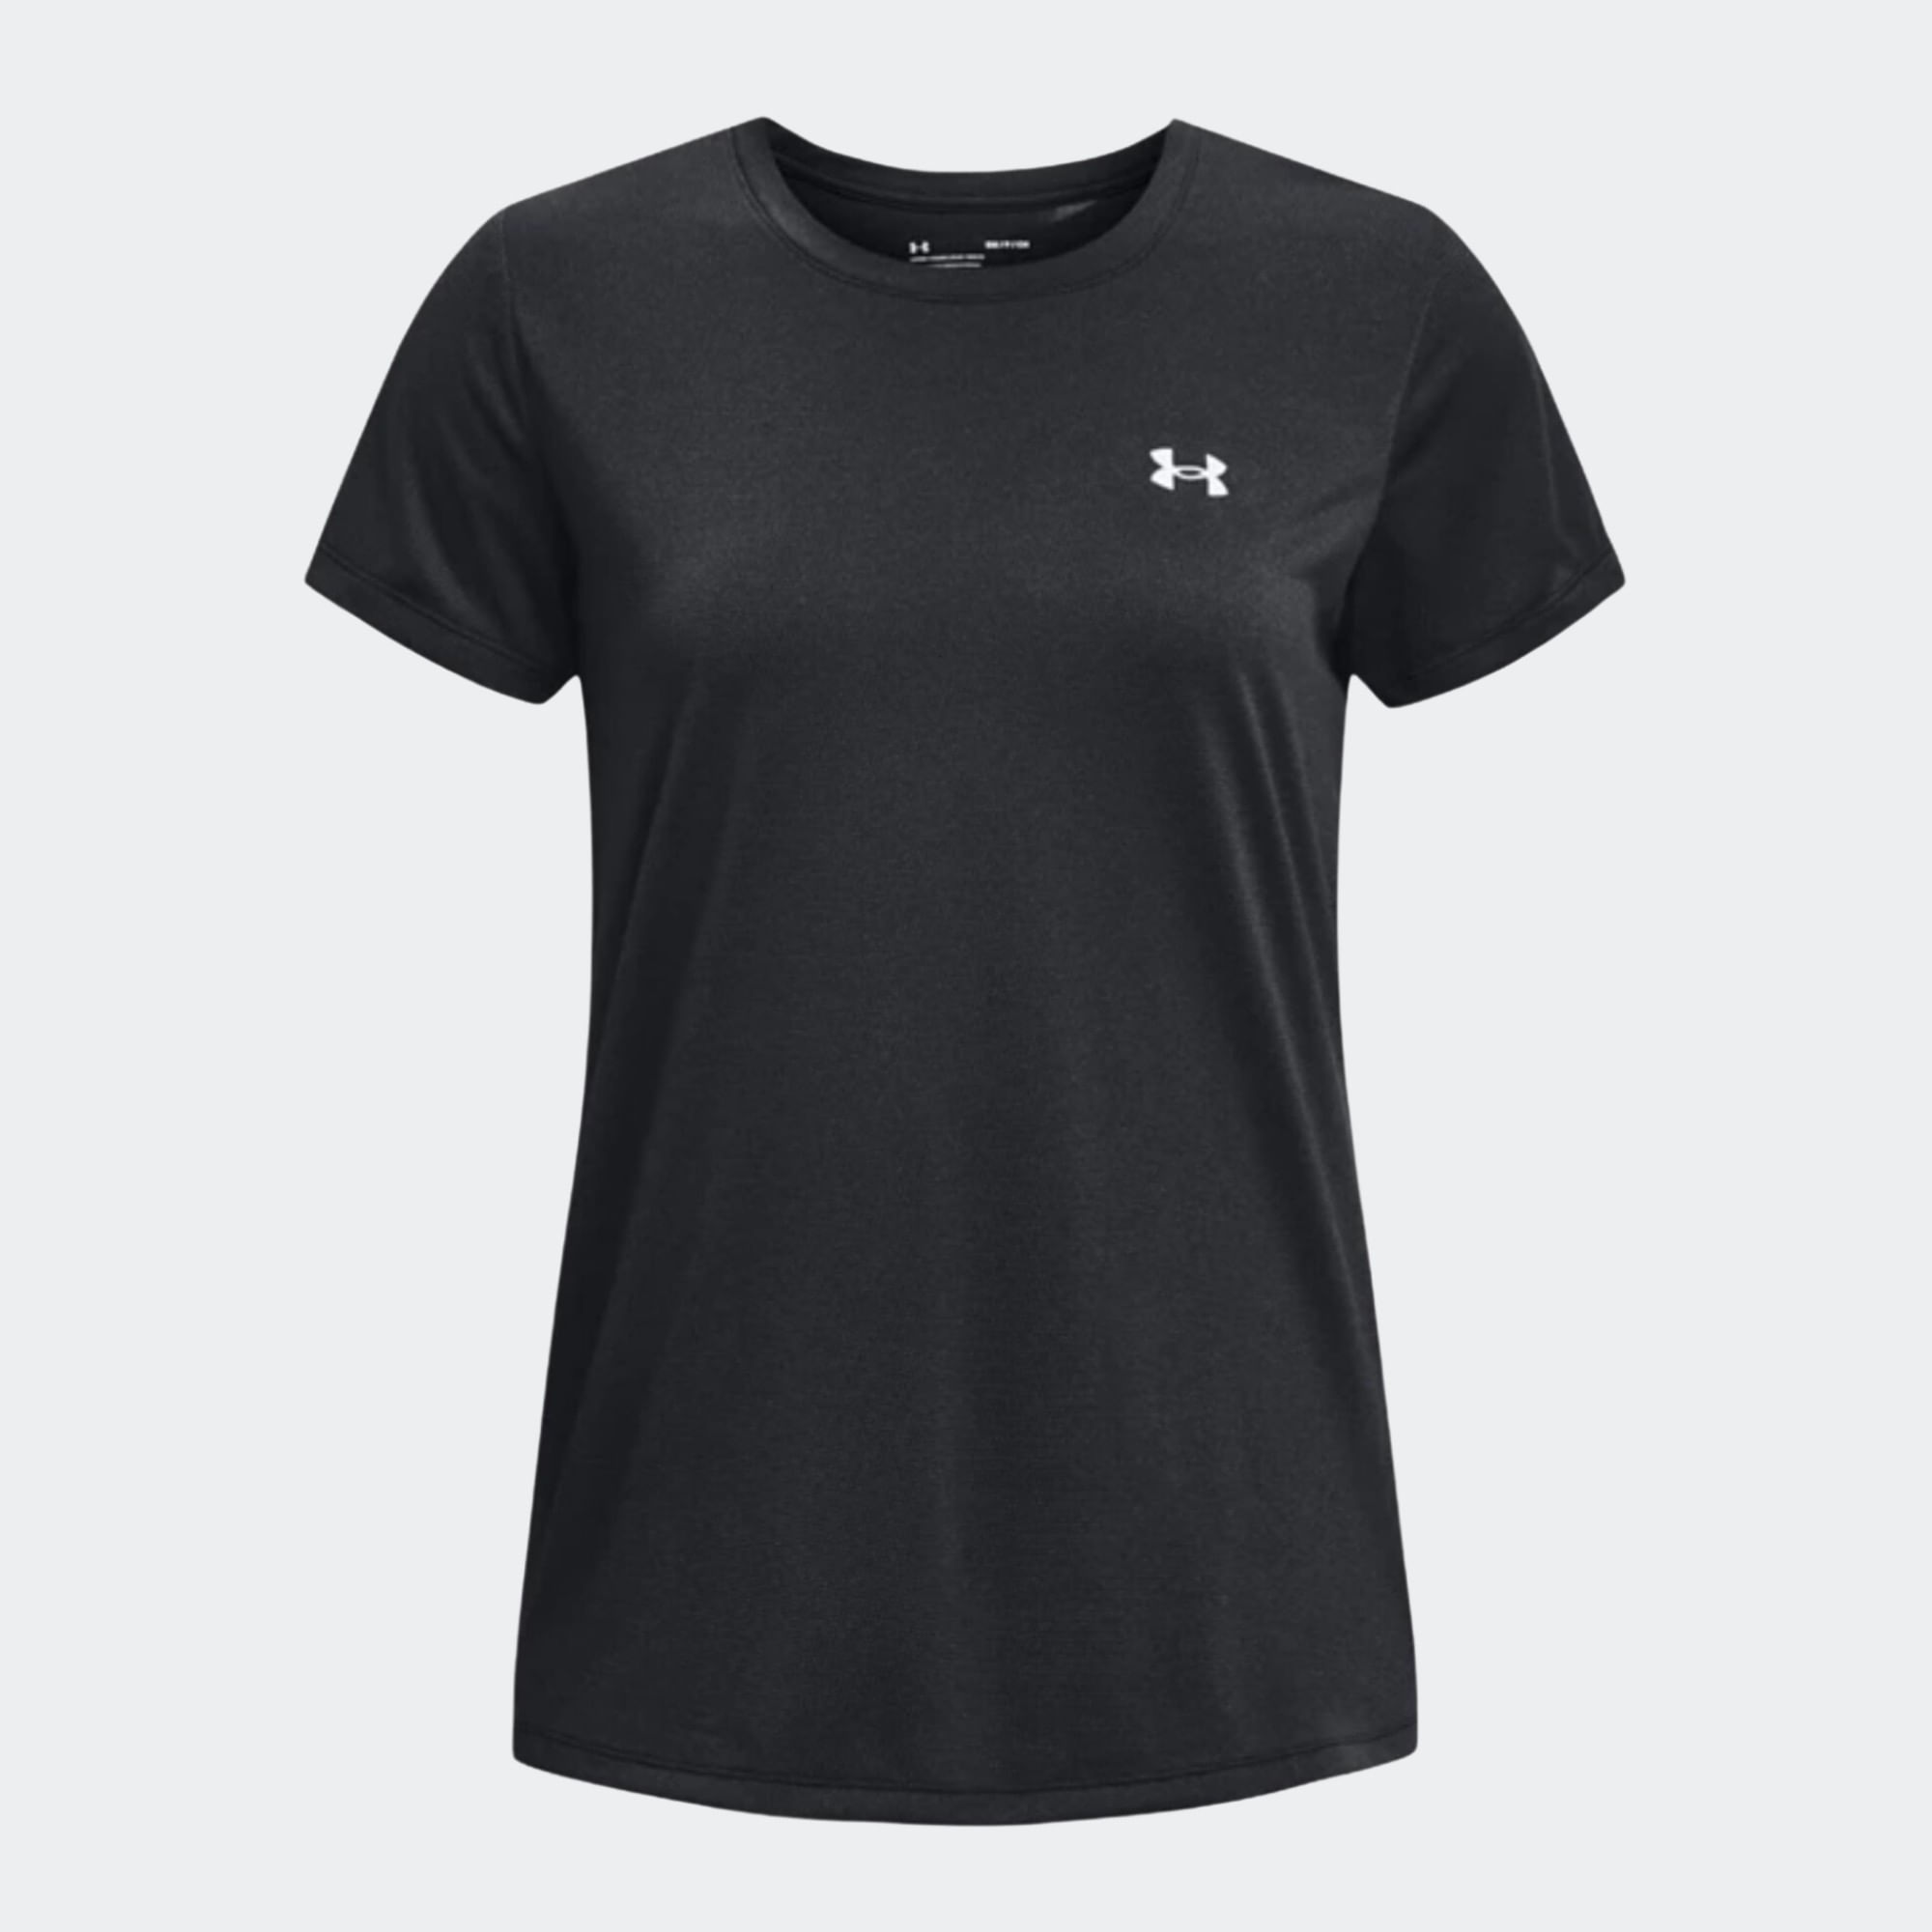 REMERA UNDER ARMOUR TECH SSC SOLID LATAM MUJER